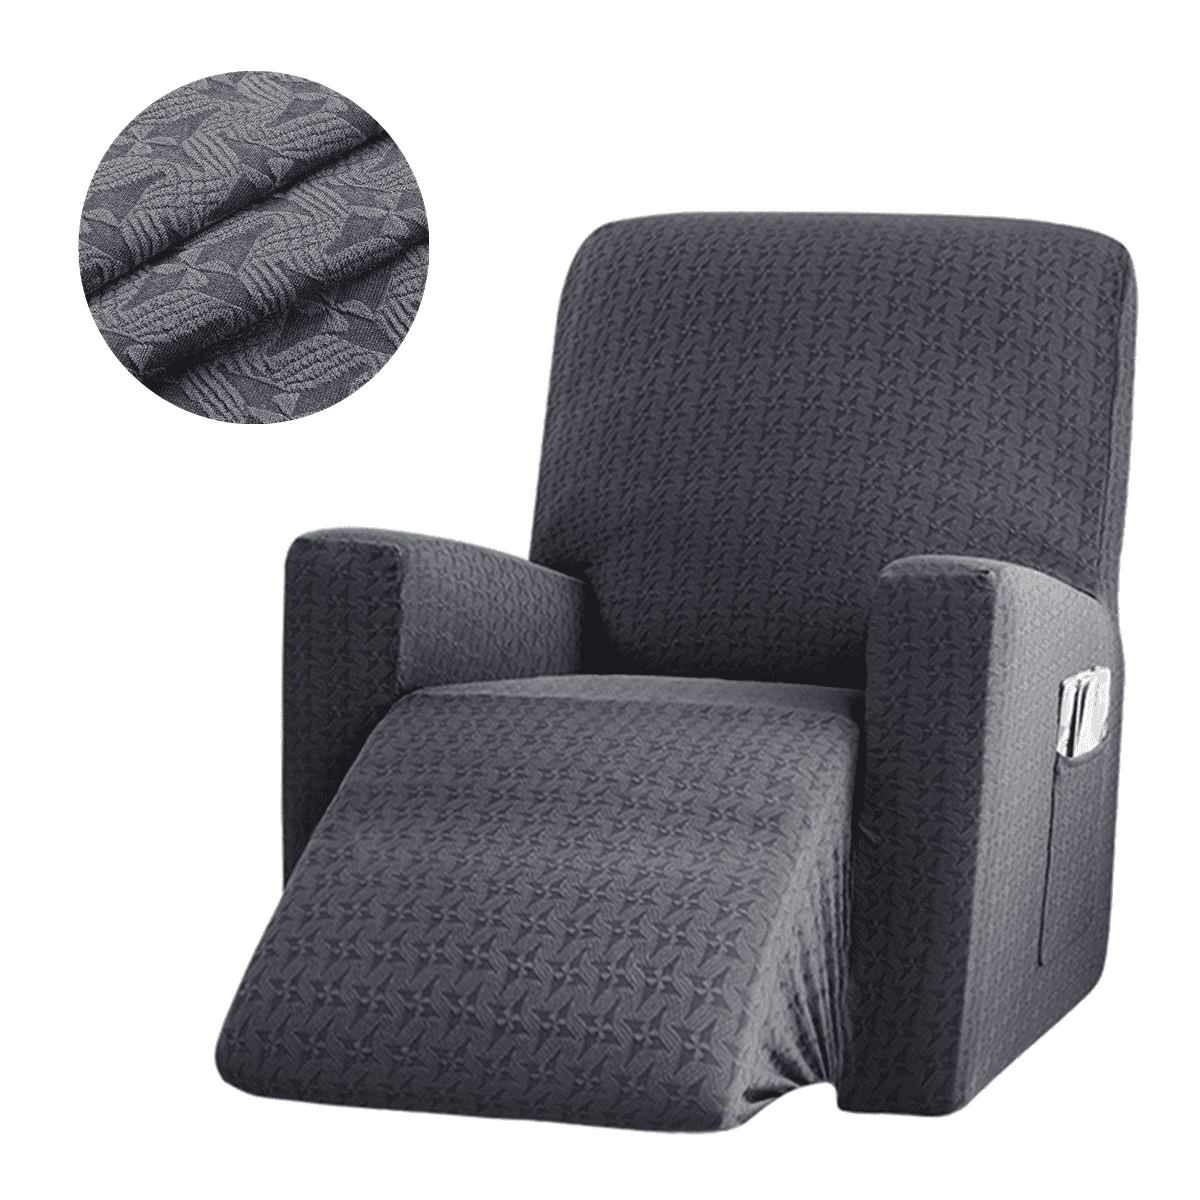 Details about   Waterproof Elastic Recliner Chair Cover Elasticity Stretch Wingback Chair 